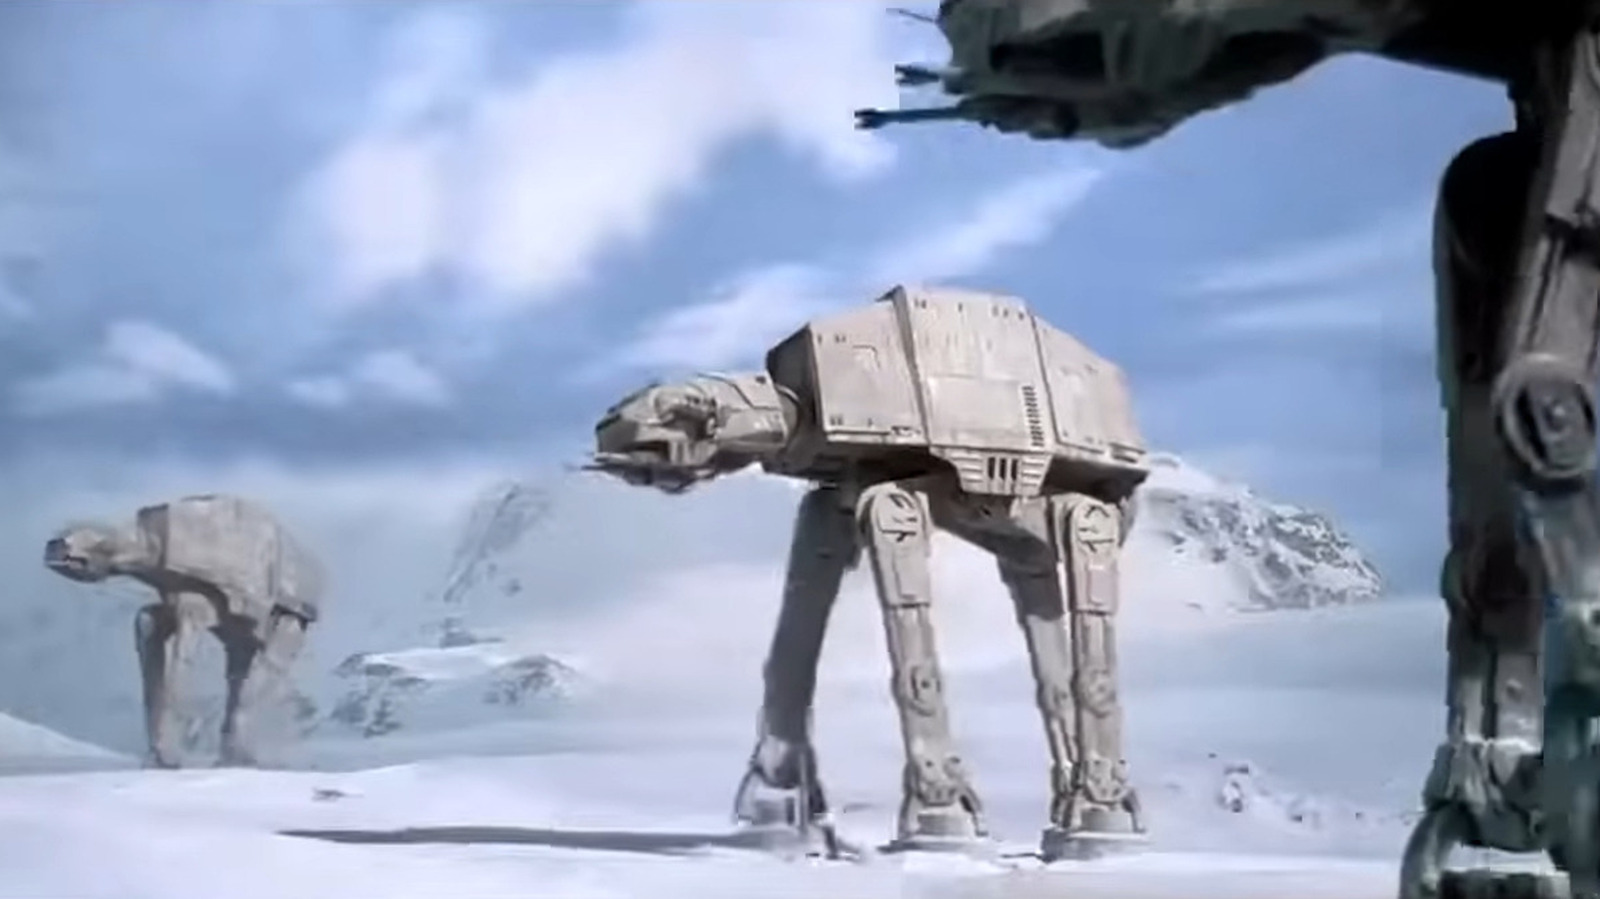 Twin Avalanches Trapped The Crew Of Star Wars: The Empire Strikes Back